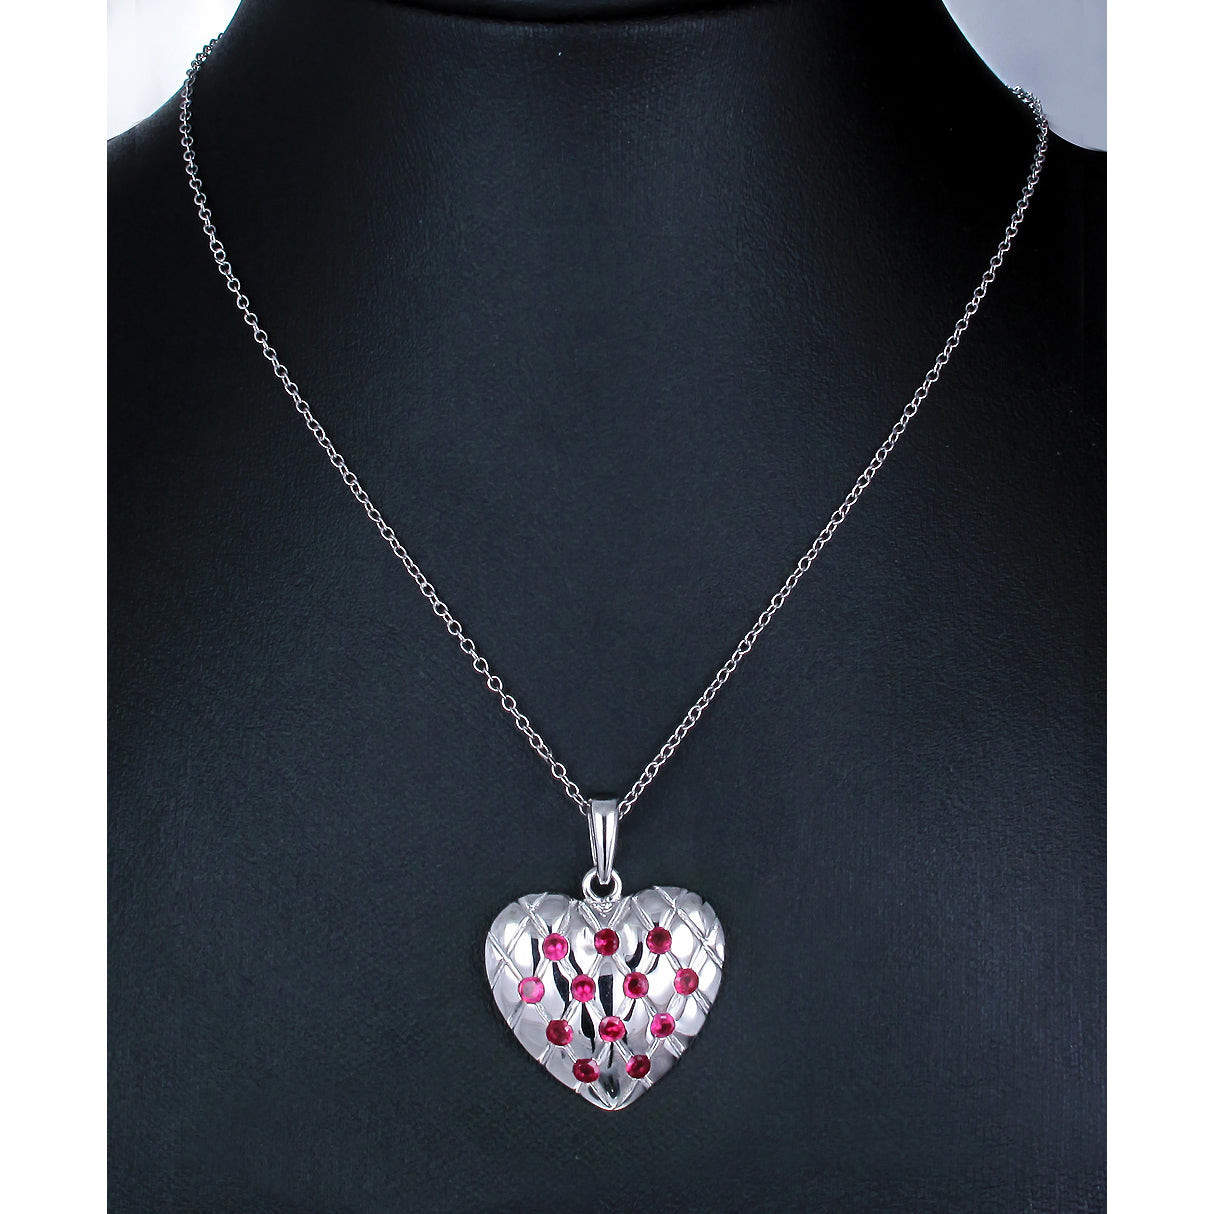 Heart Pendant Necklace, Red CZ Heart Pendant Necklace for Women in .925 Sterling Silver with 18 Inch Chain